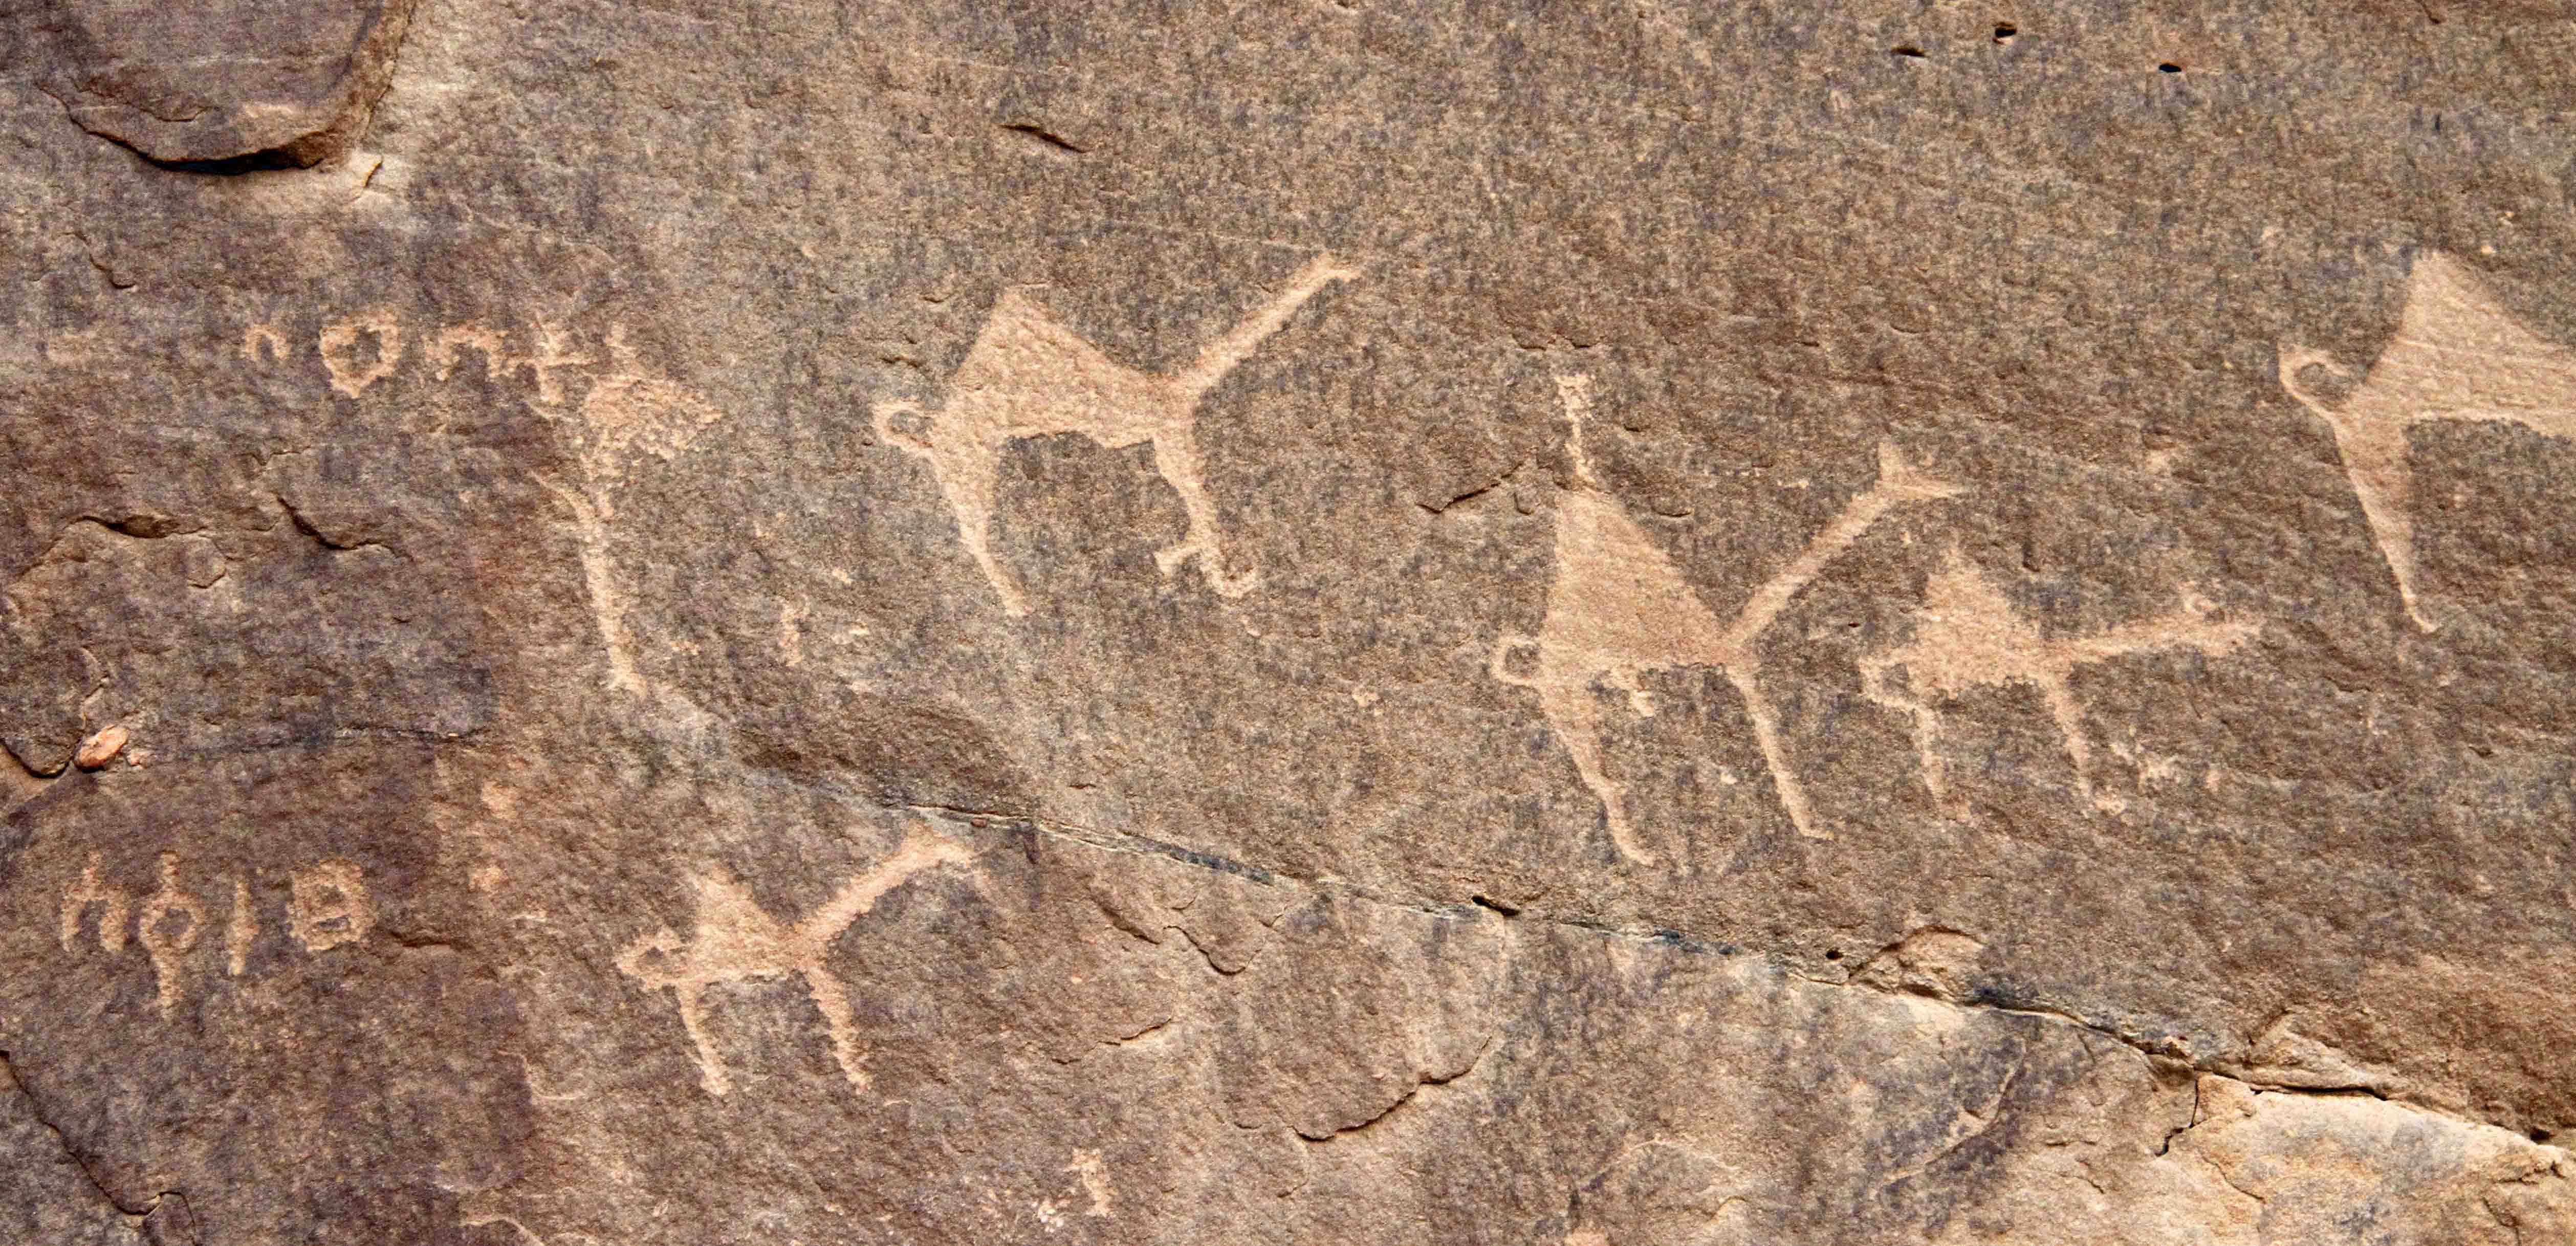 Nabatean petroglyphs carved two thousand years ago into the desert rock